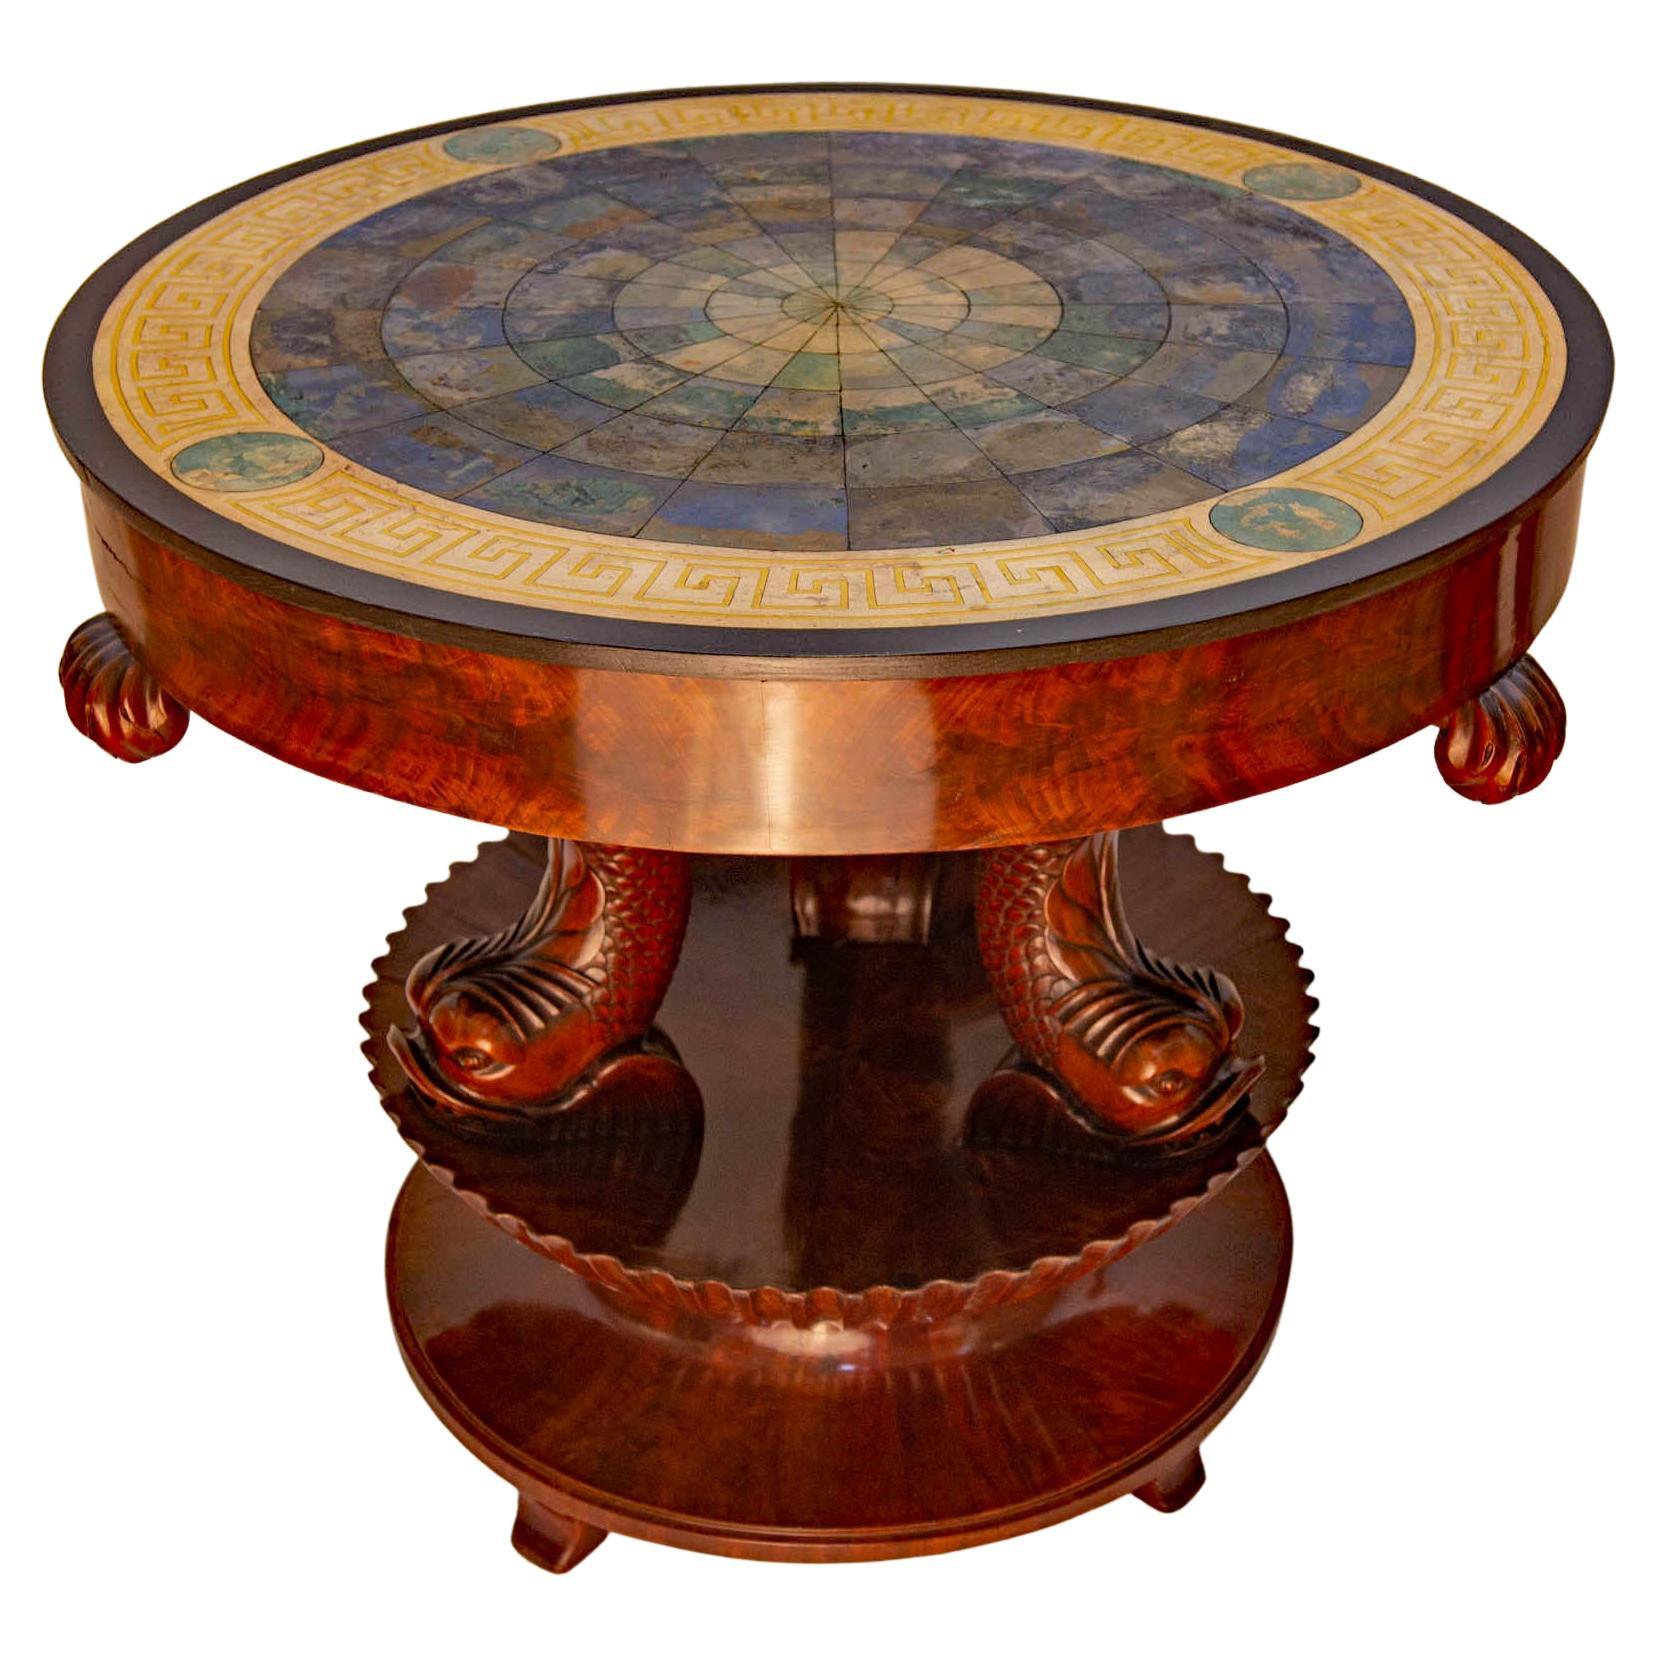 Antique Italian Neoclassical Sgagliola Table with Carved Dolphin Base circa 1810 For Sale